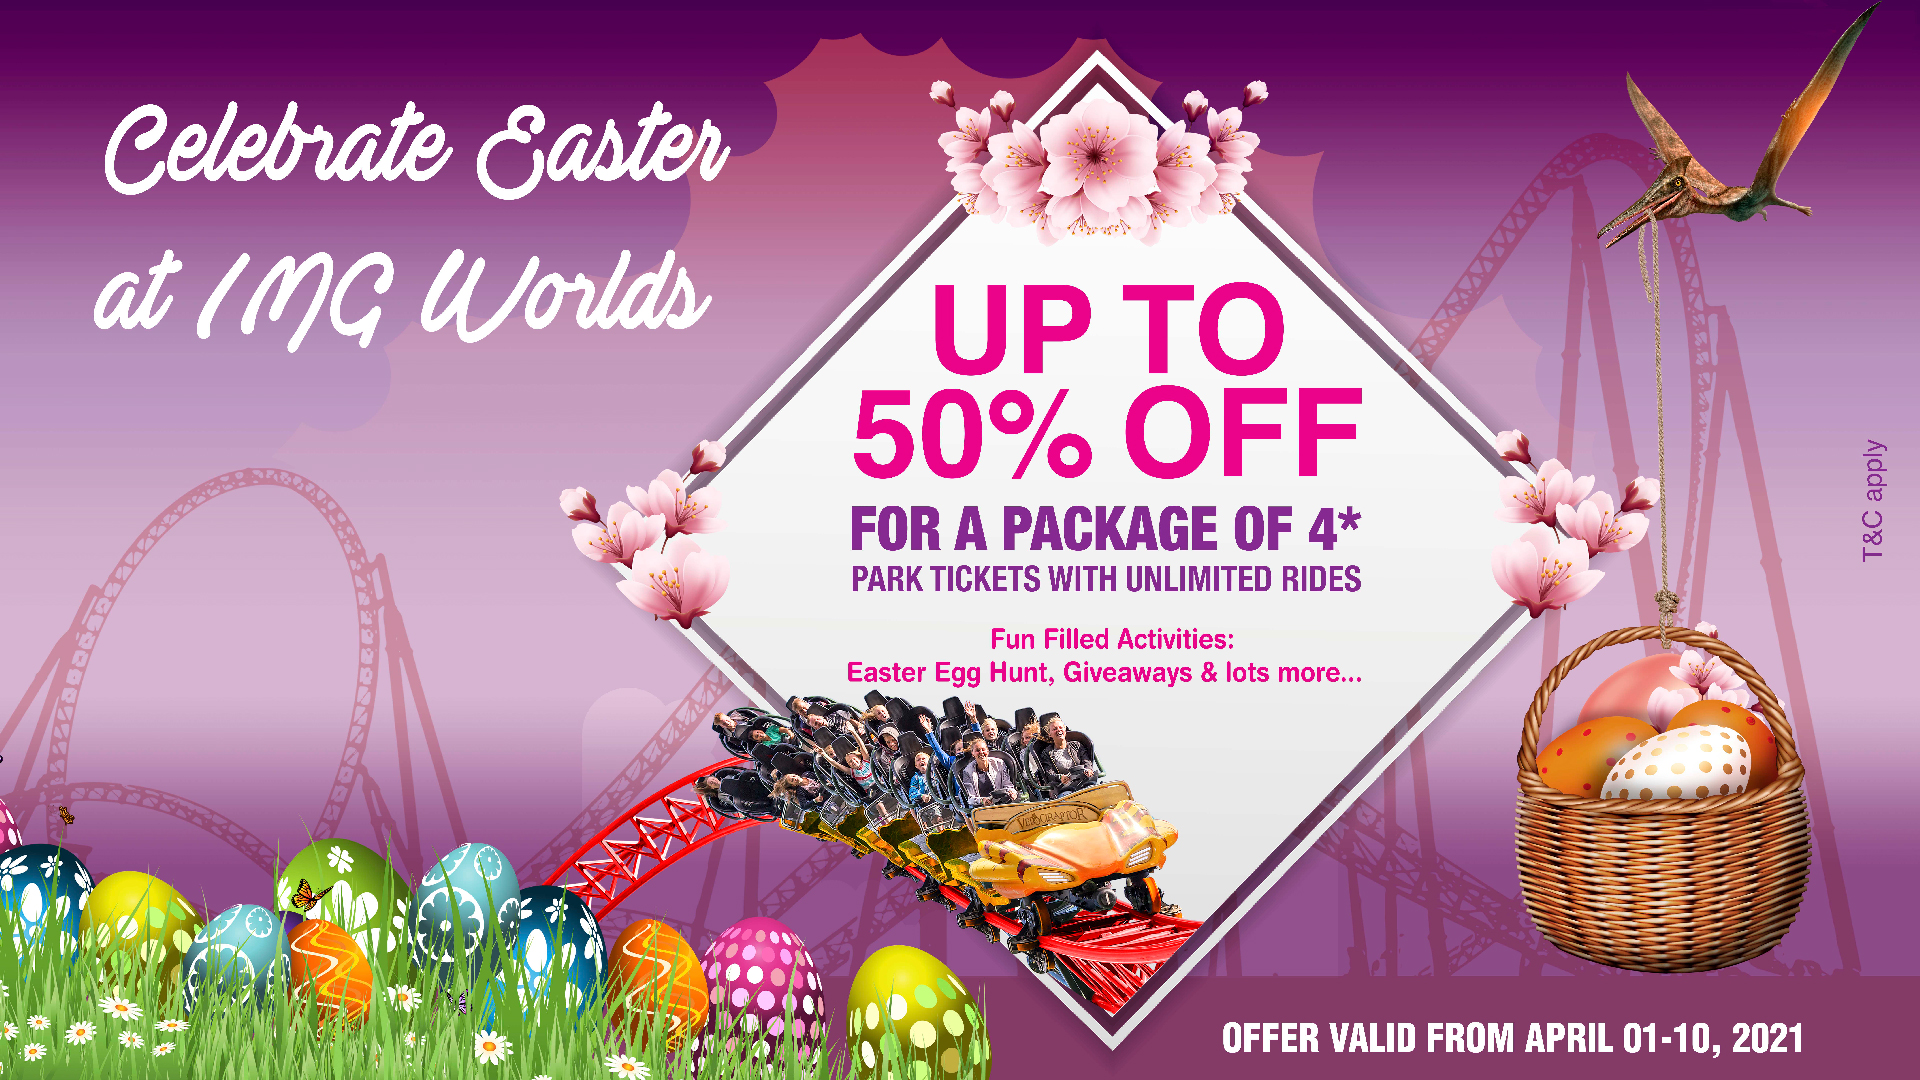 IMG Worlds of Adventure Easter Offer